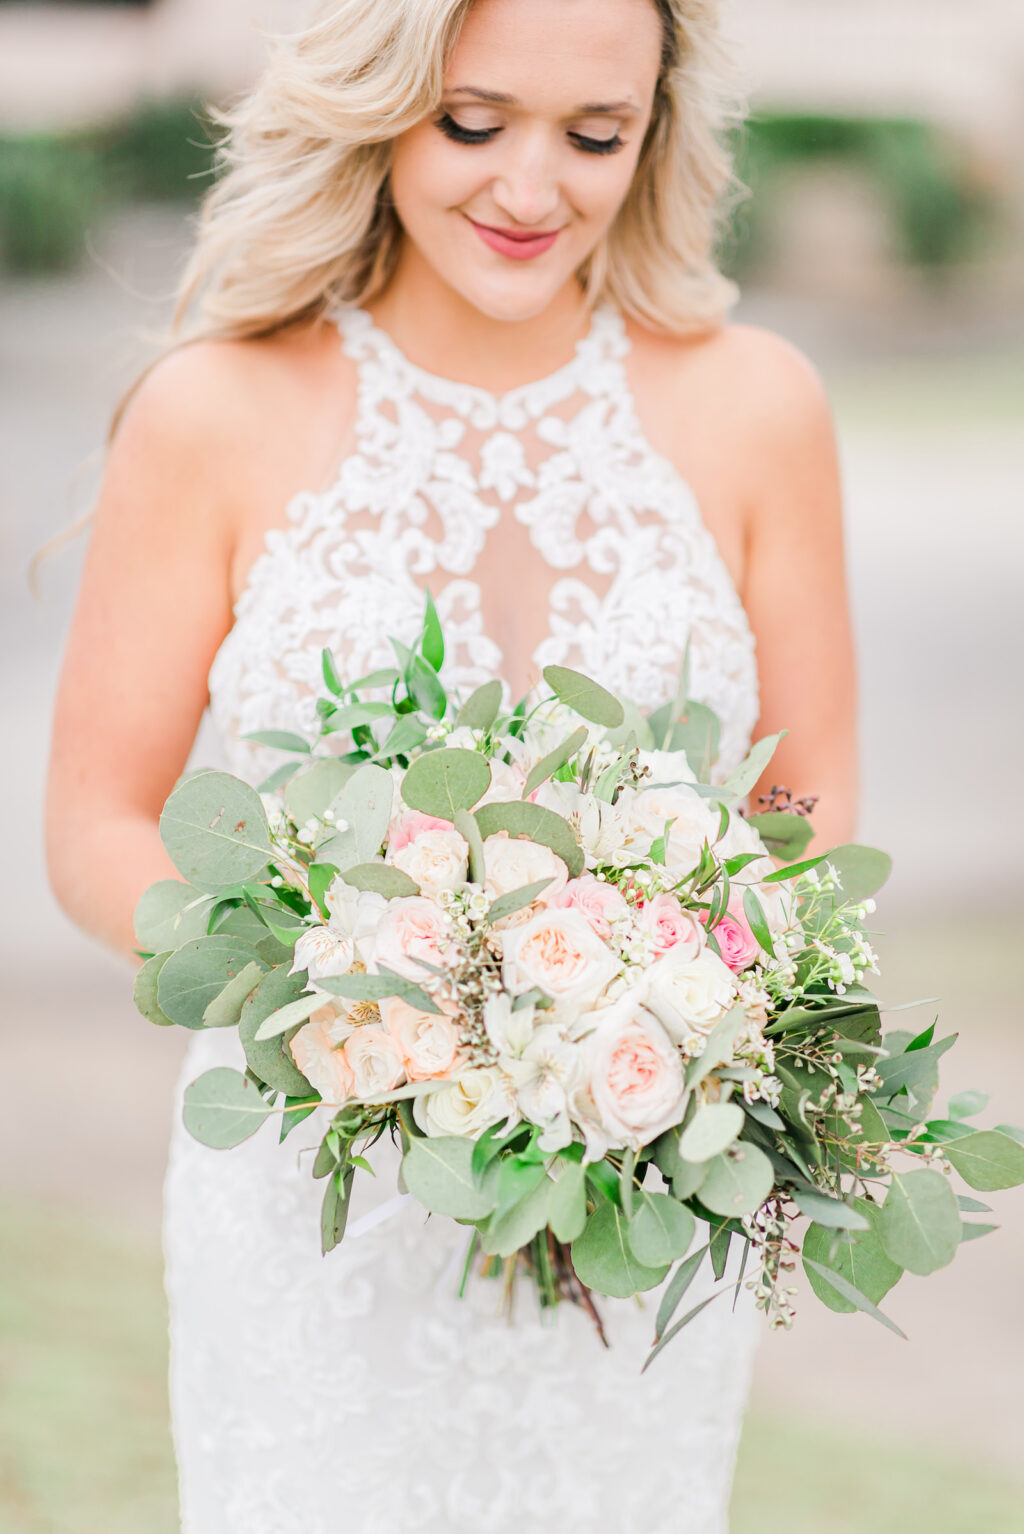 Romantic Pink Garden St. Pete Wedding | Bride Holding Blush Pink, Ivory Roses with Greenery and Eucalyptus Floral Bridal Bouquet | Tampa Bay Wedding Florist Brides N Blooms Designs